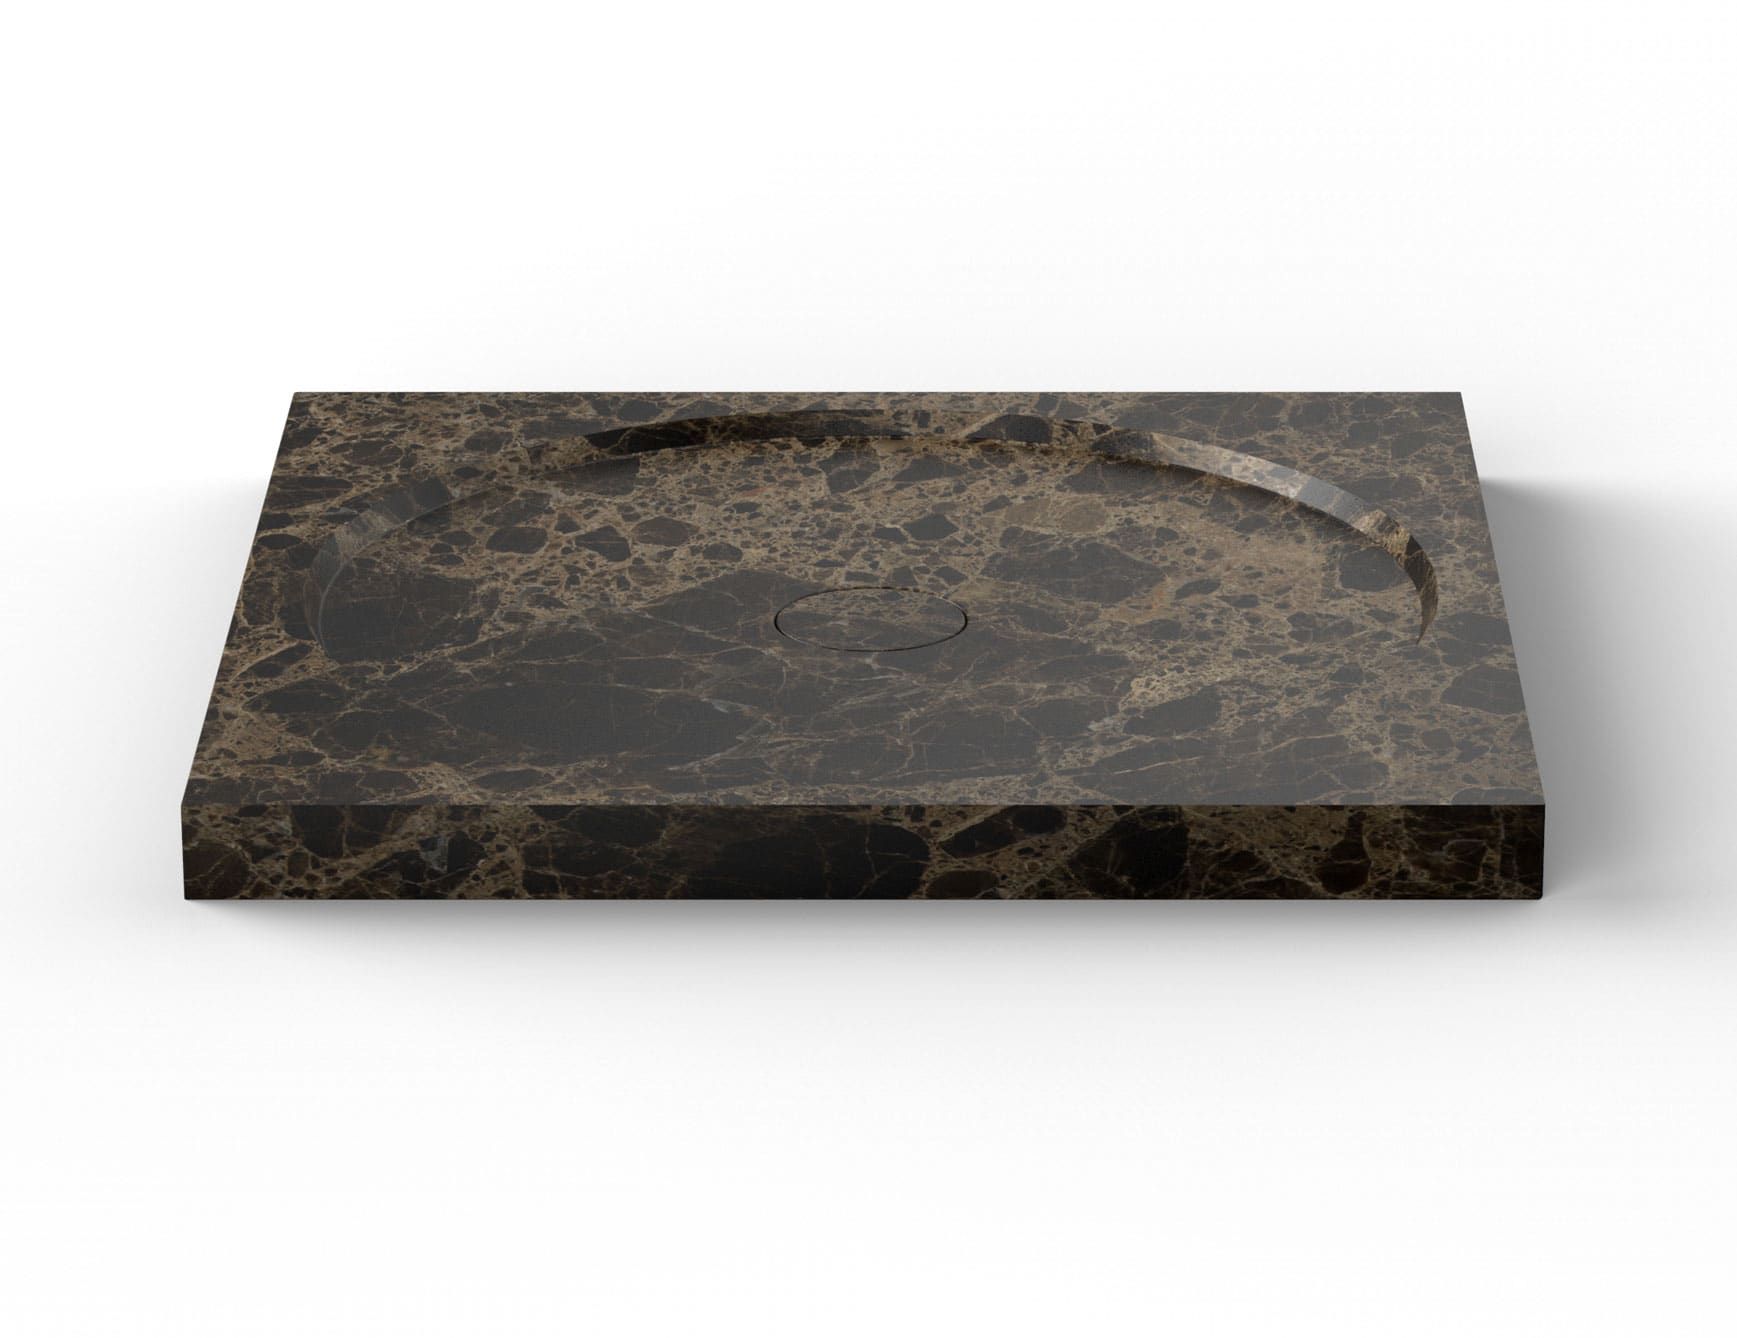 Entity Circle Shower 2 contemporary Italian shower tray with brown Emperador marble